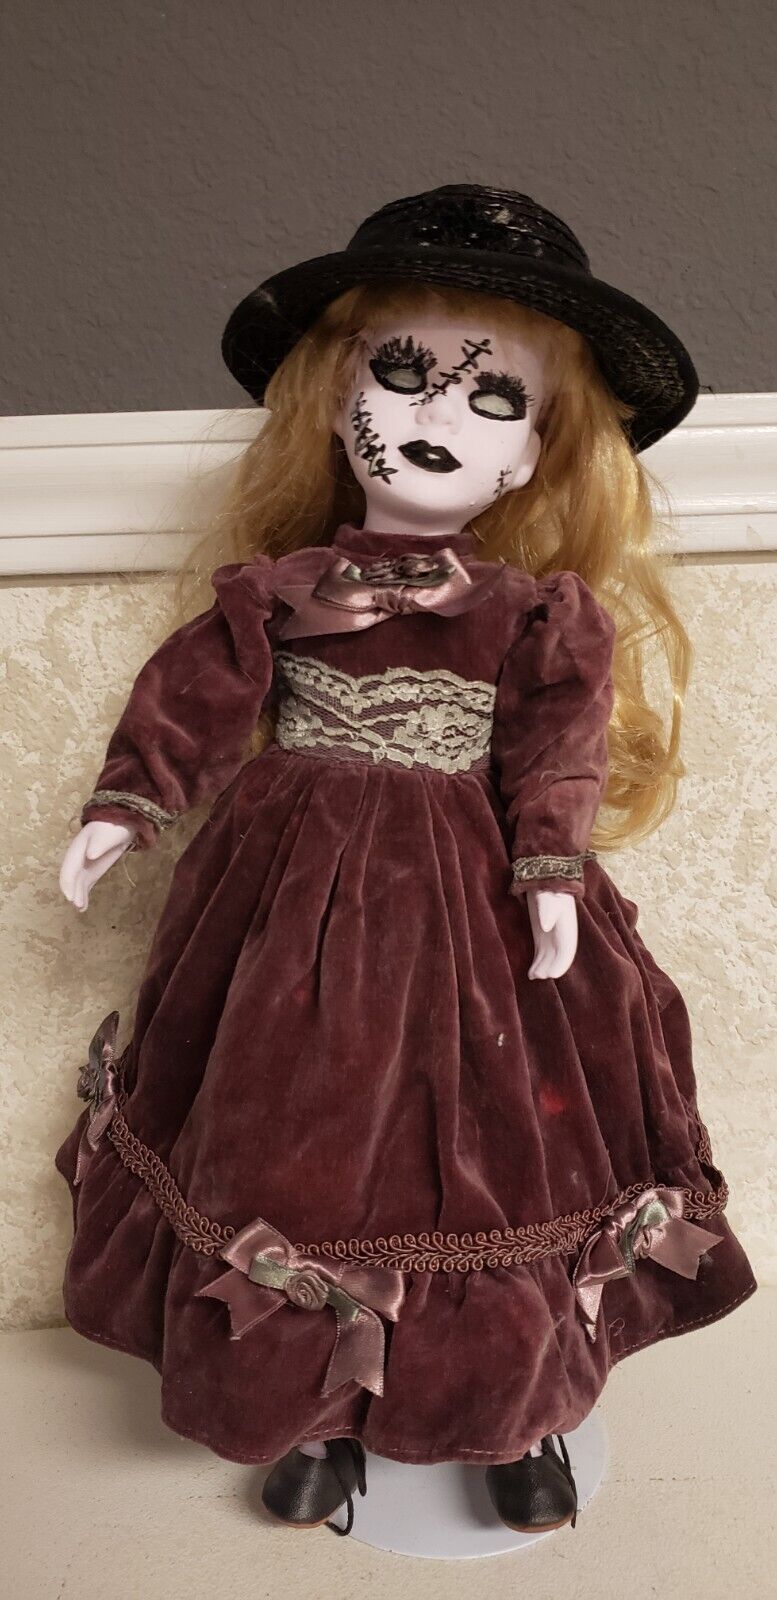 OOAK , Gothic Look doll with stand, 18 in, handpainted, Halloween Prop